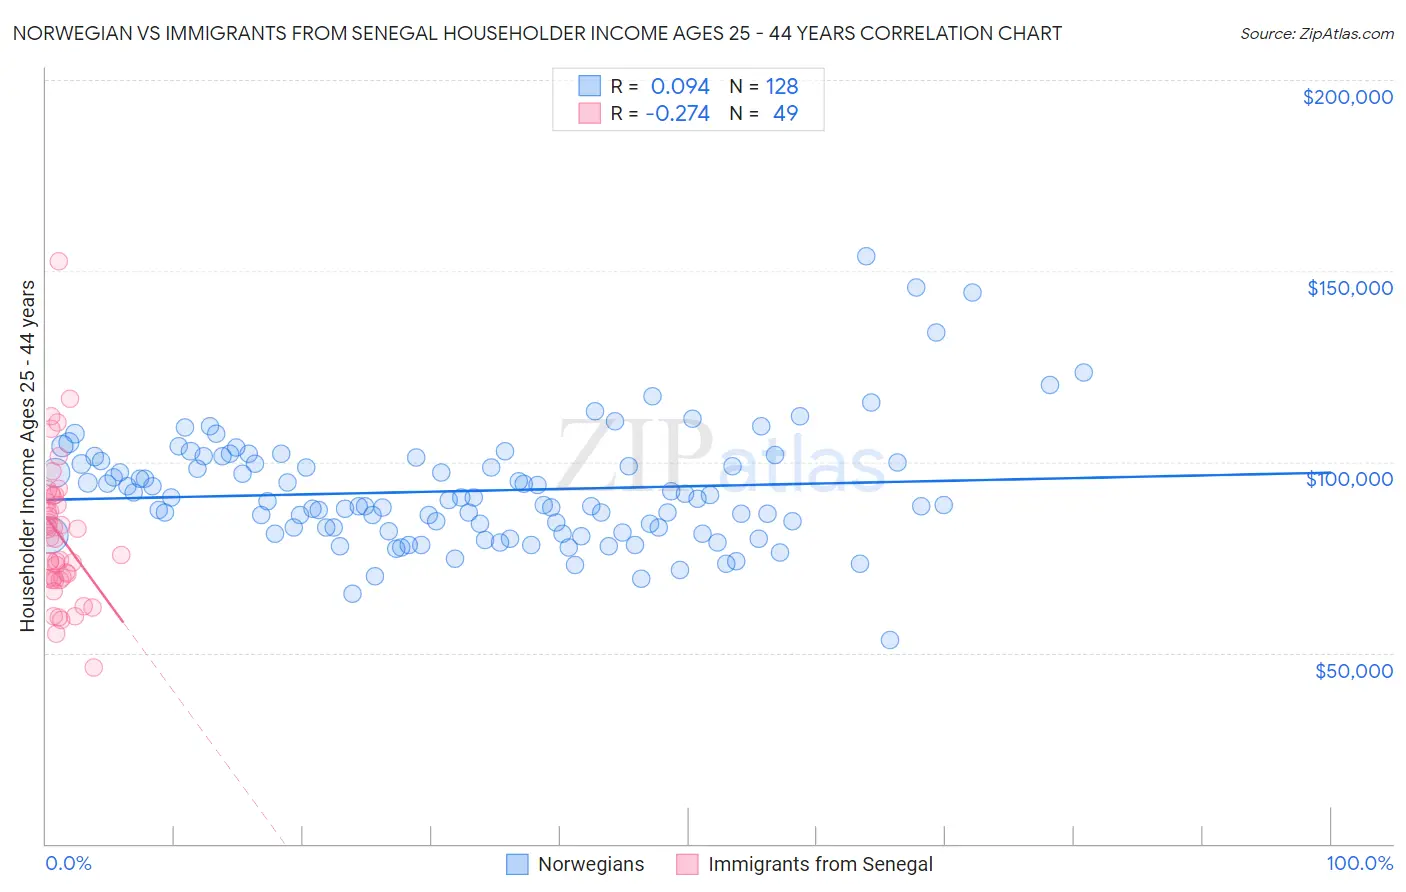 Norwegian vs Immigrants from Senegal Householder Income Ages 25 - 44 years